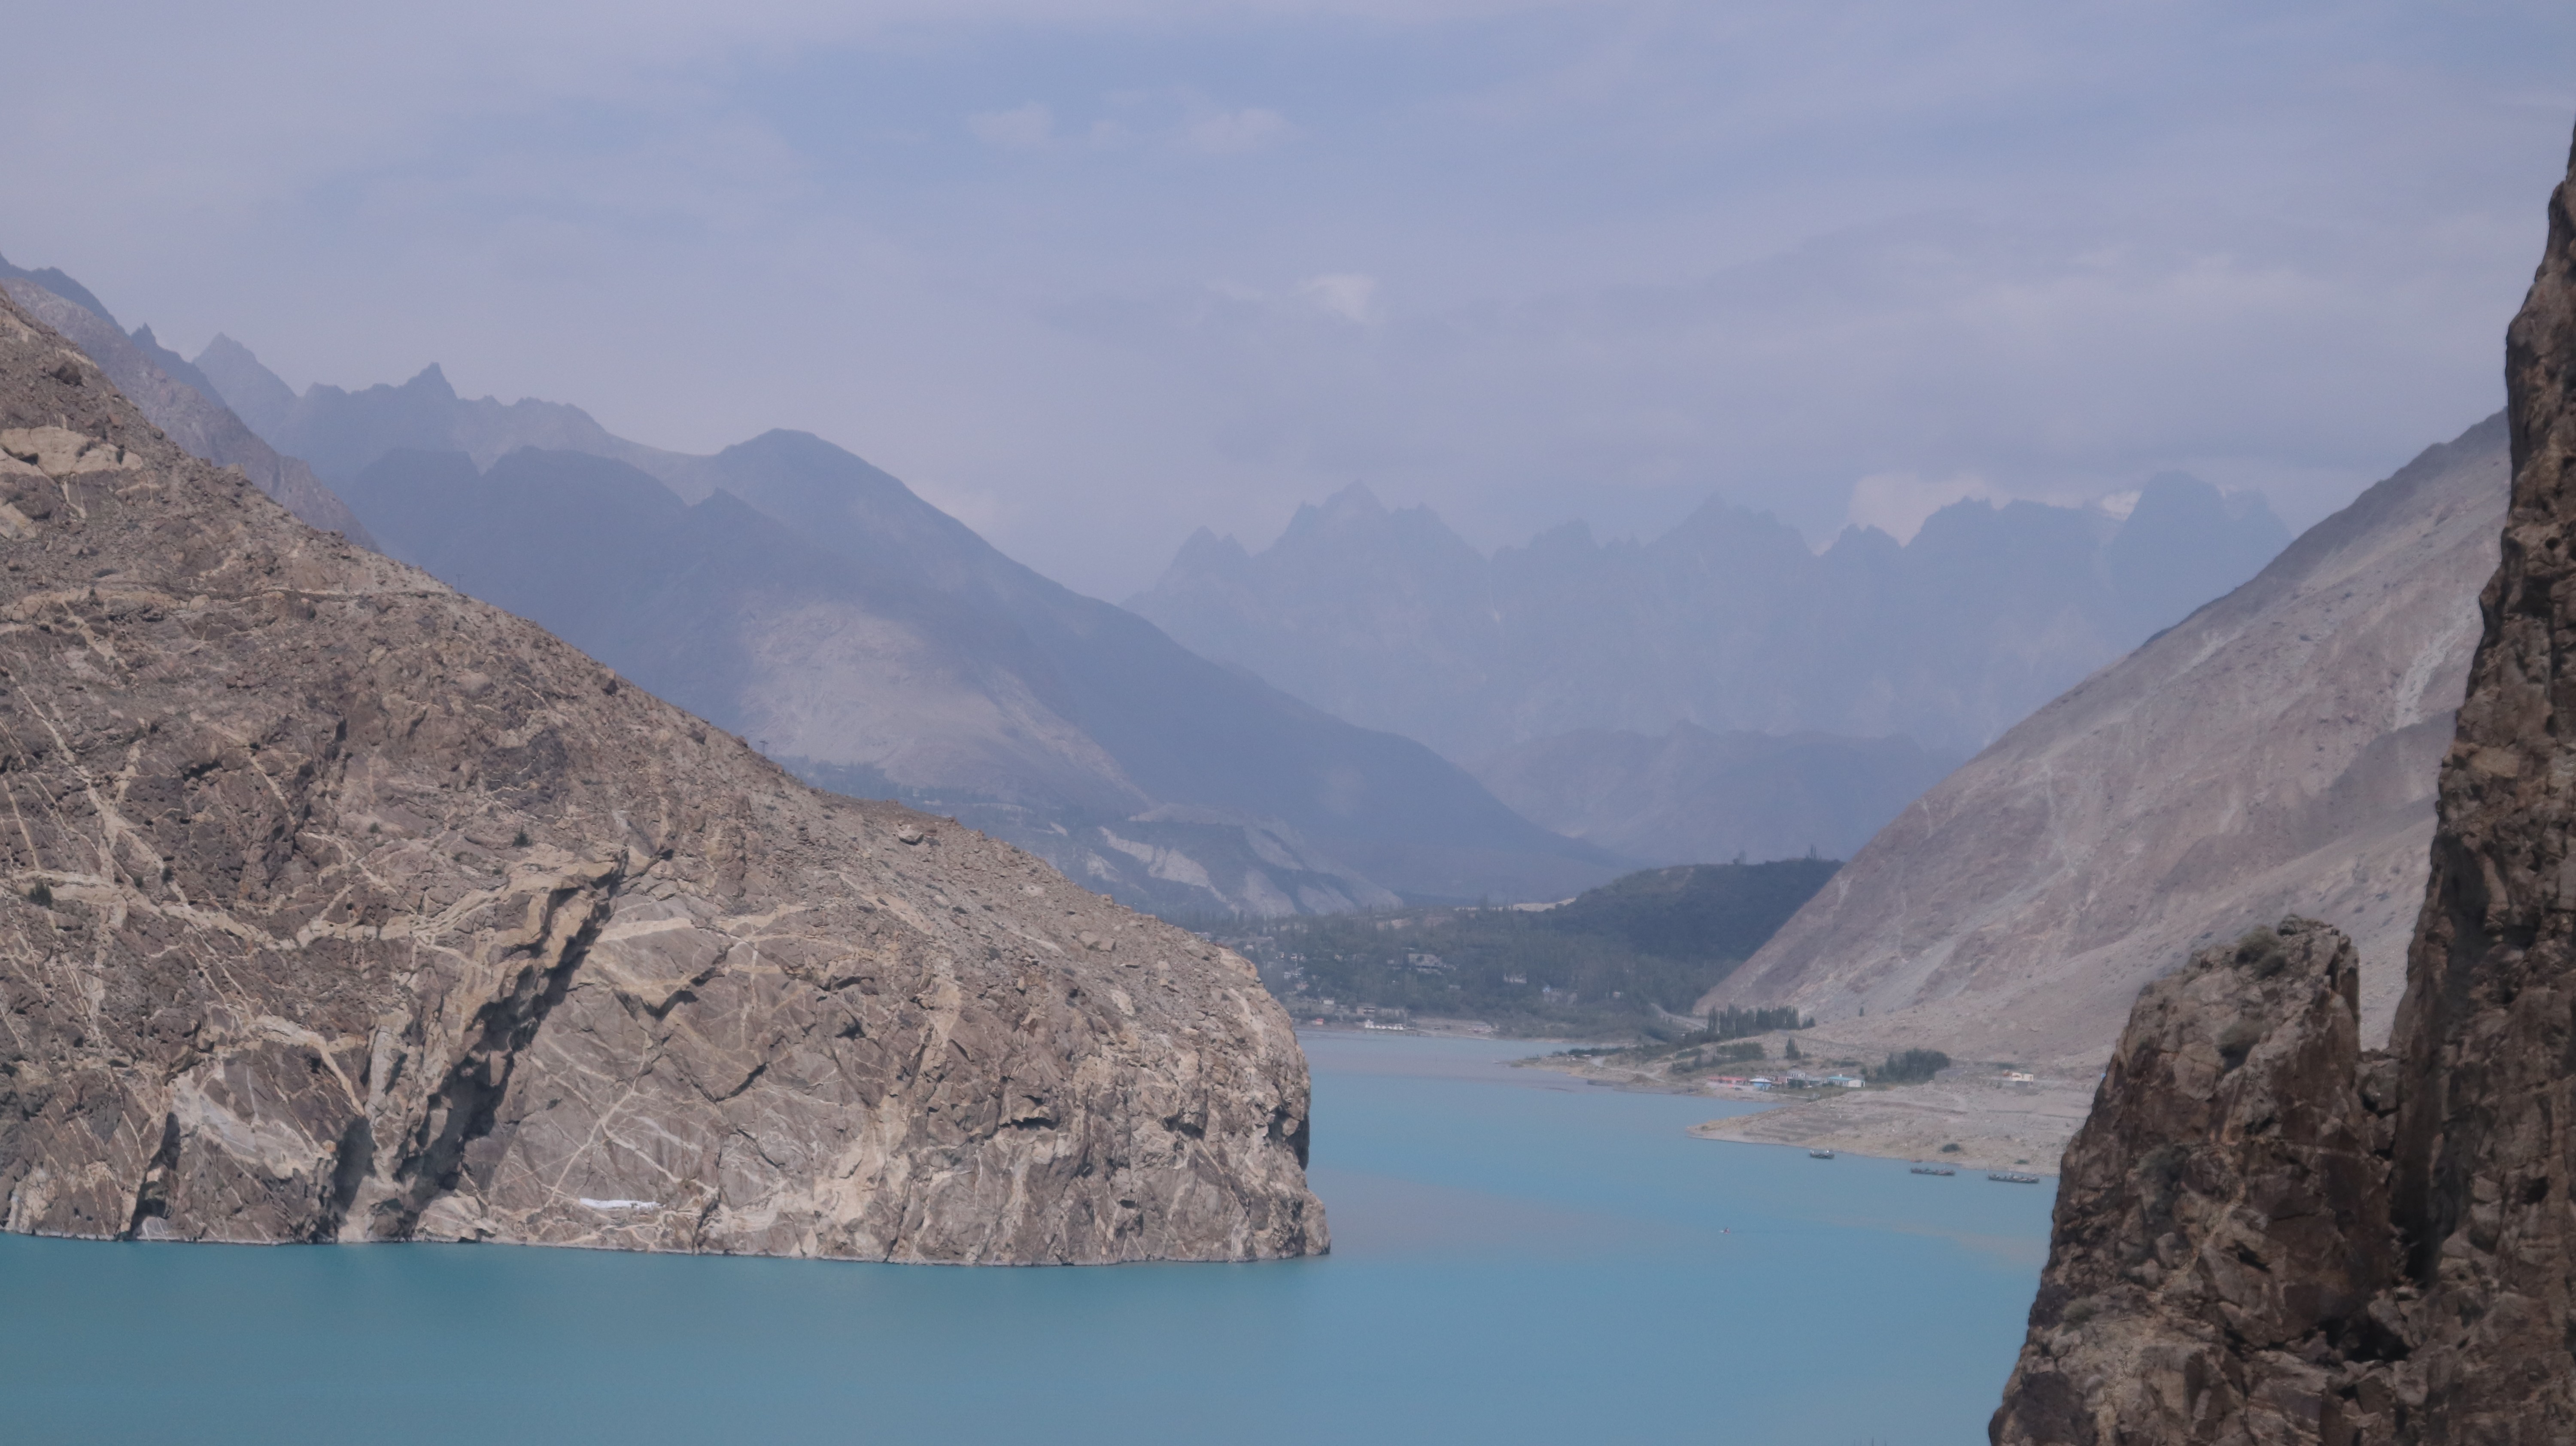 The scenic beauty of Attabad Lake created as a result of natural disaster in the village of Attabad.